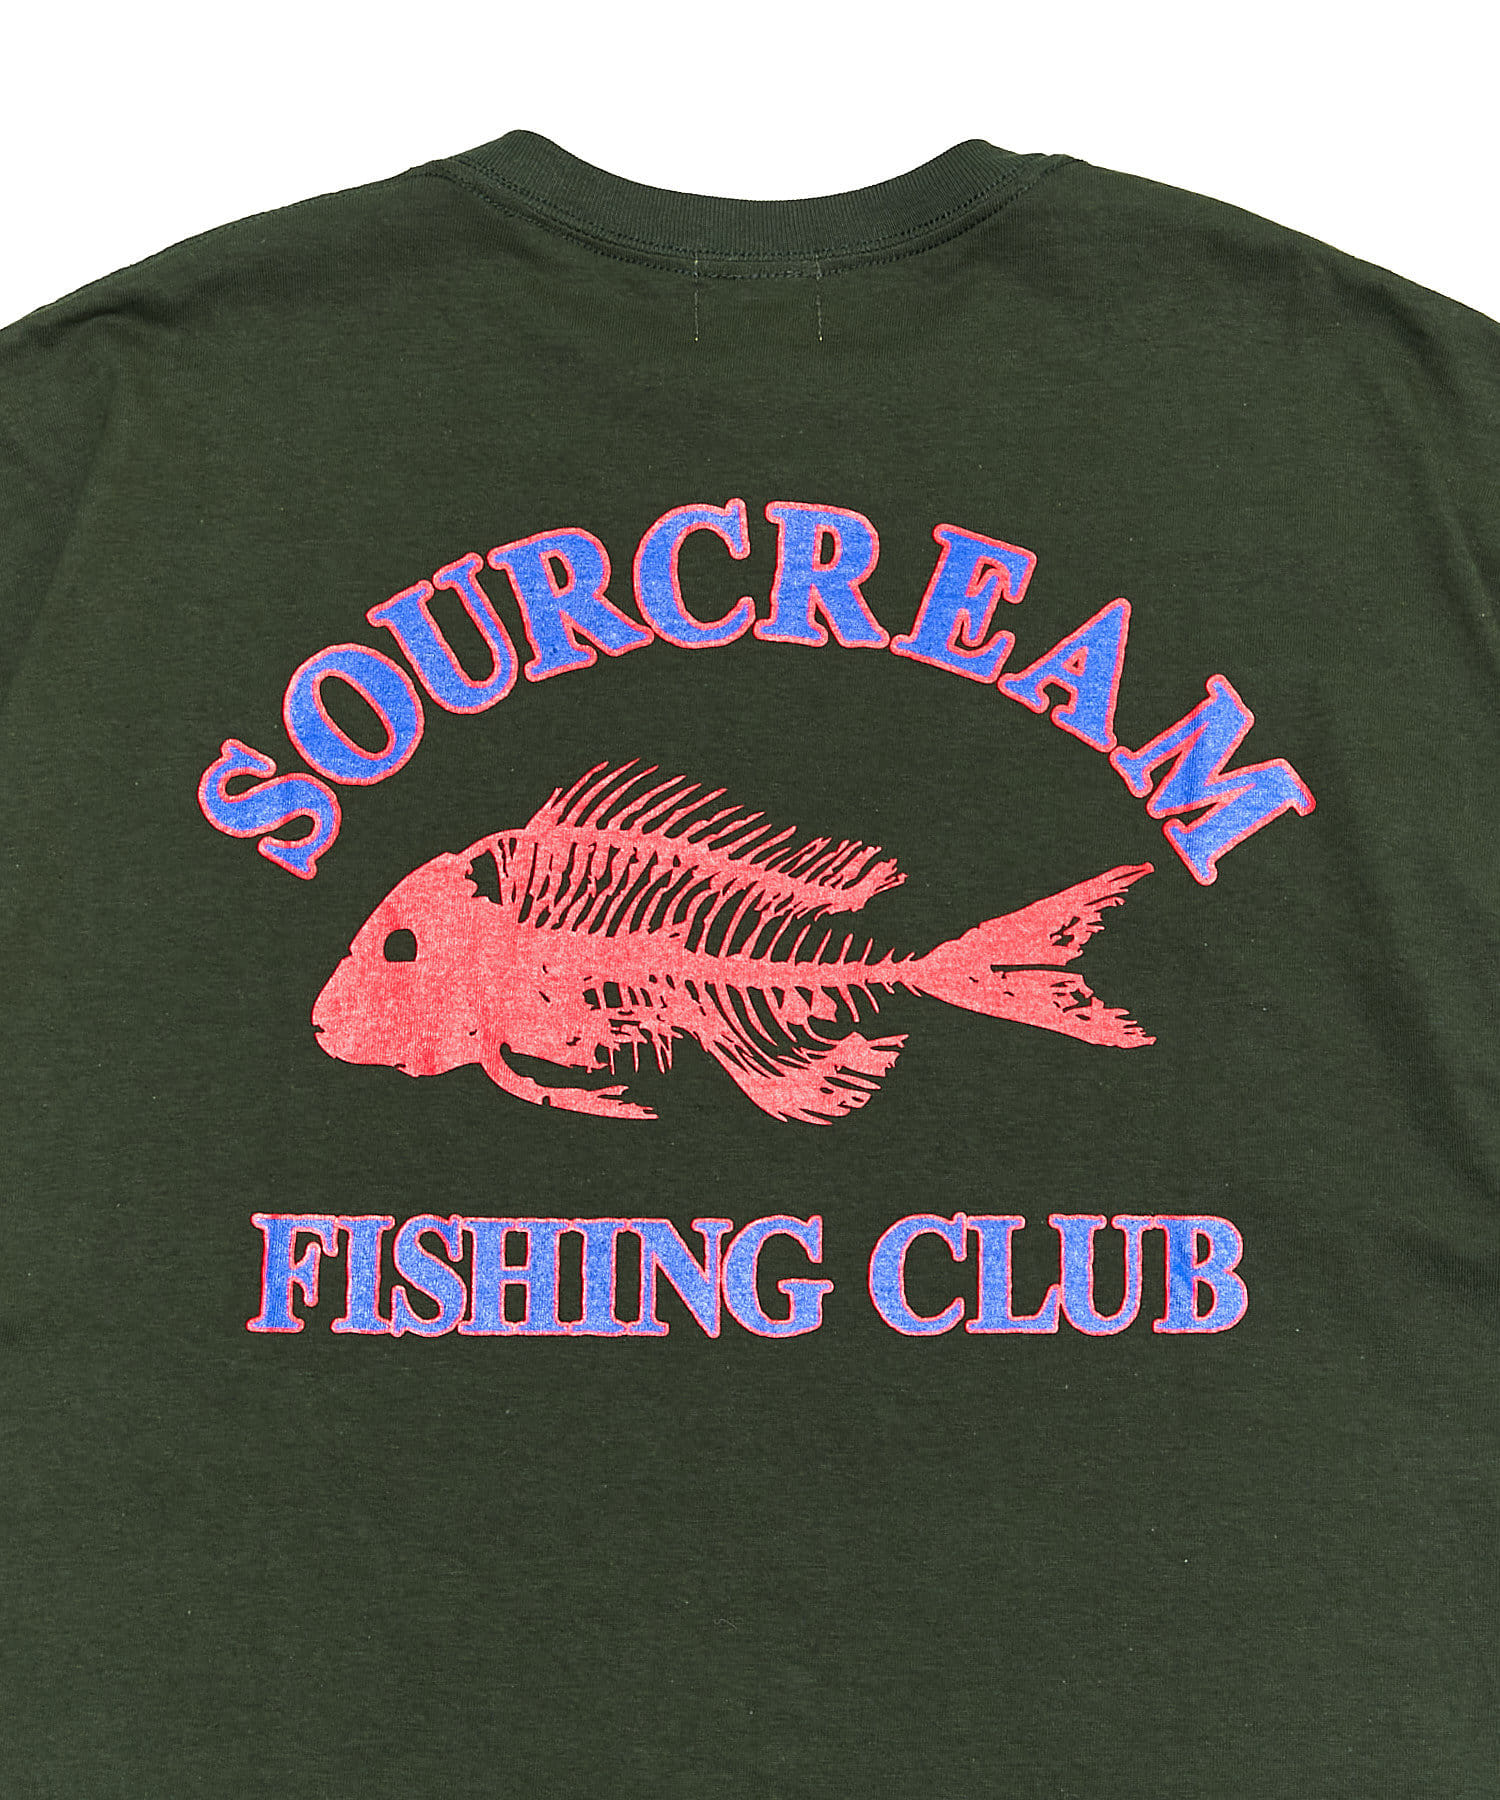 OUTLET(アウトレット) 【WHO'S WHO gallery】FISHカレッジTEE